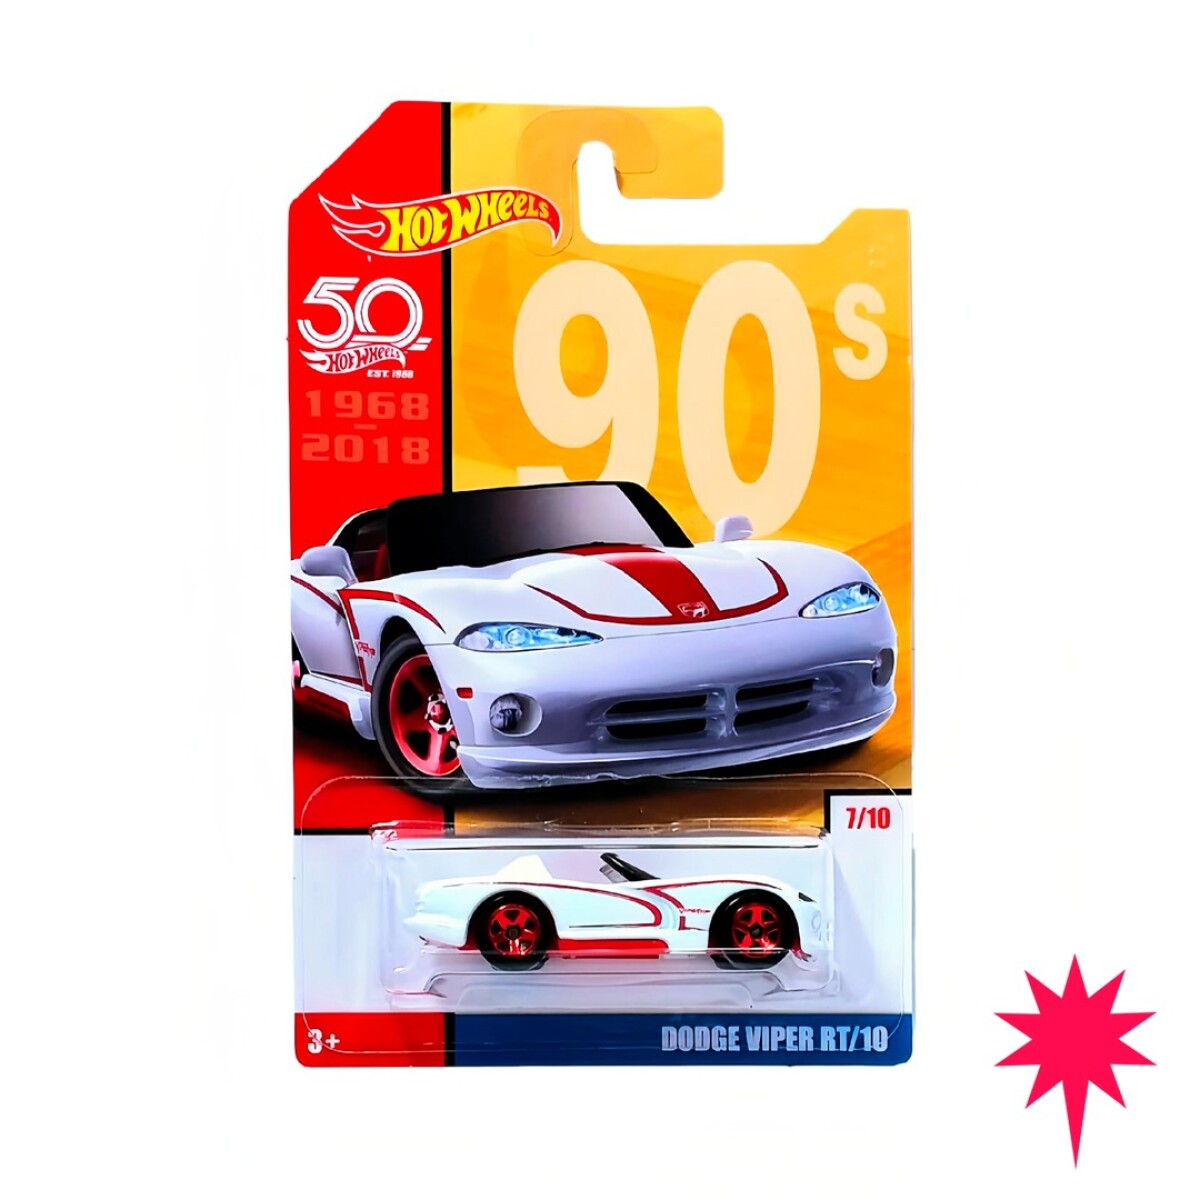 HOT WHEELS! CHALLENGING THE LIMITS SINCE 1968- DODGE VIPER RT/10 